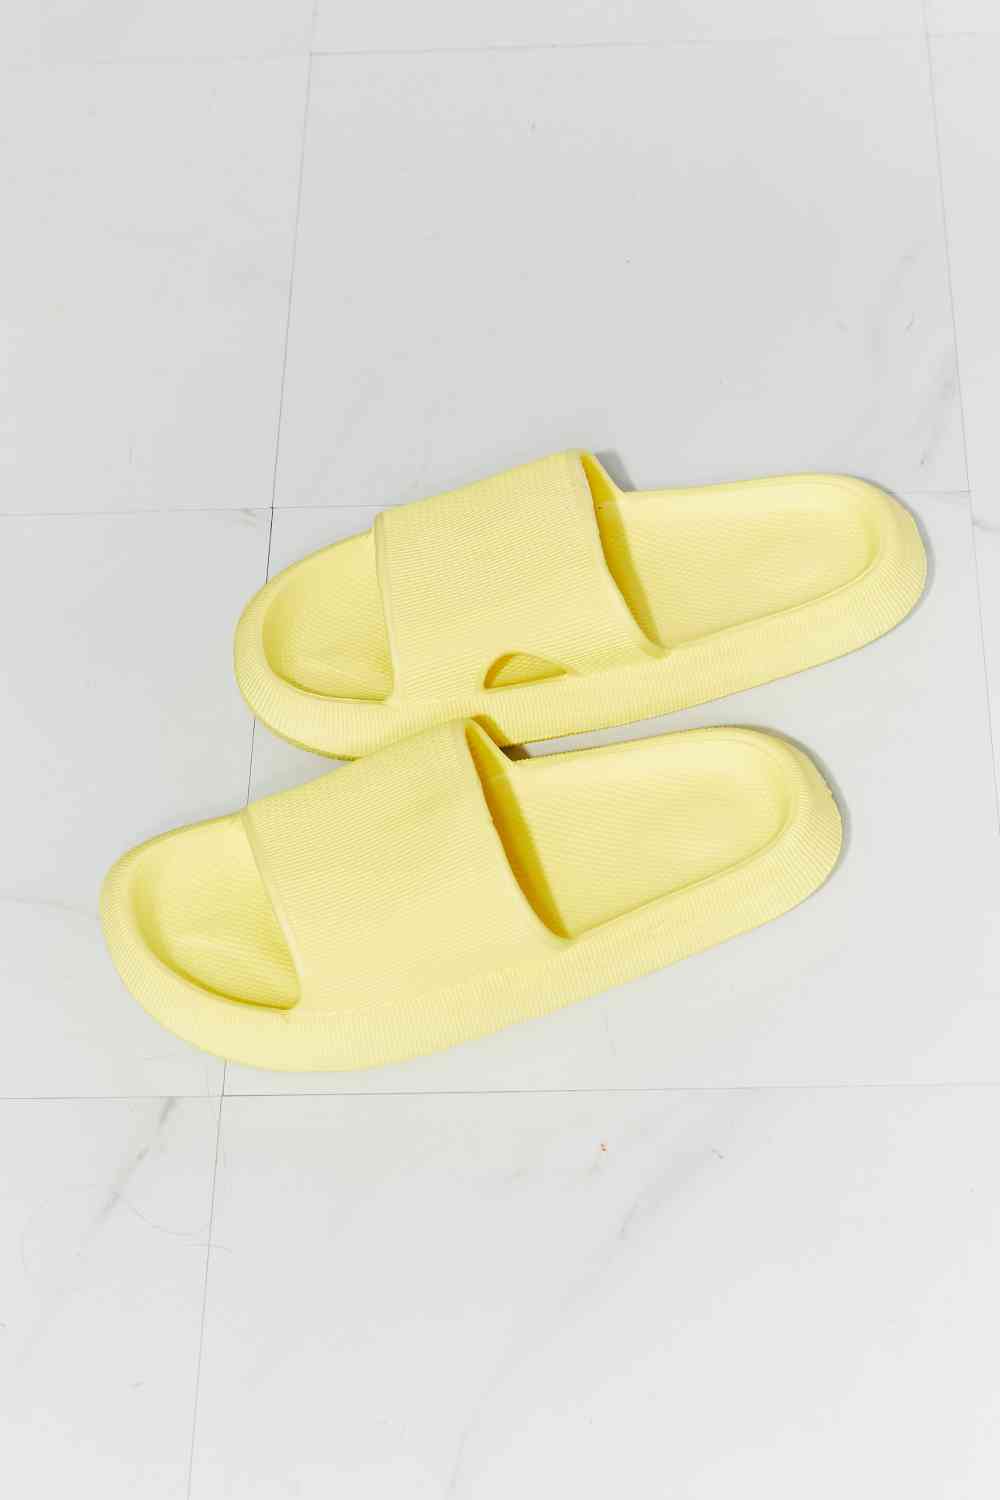 Arms Around Me Open Toe Slide in Yellow - Accessories - Shoes - 6 - 2024